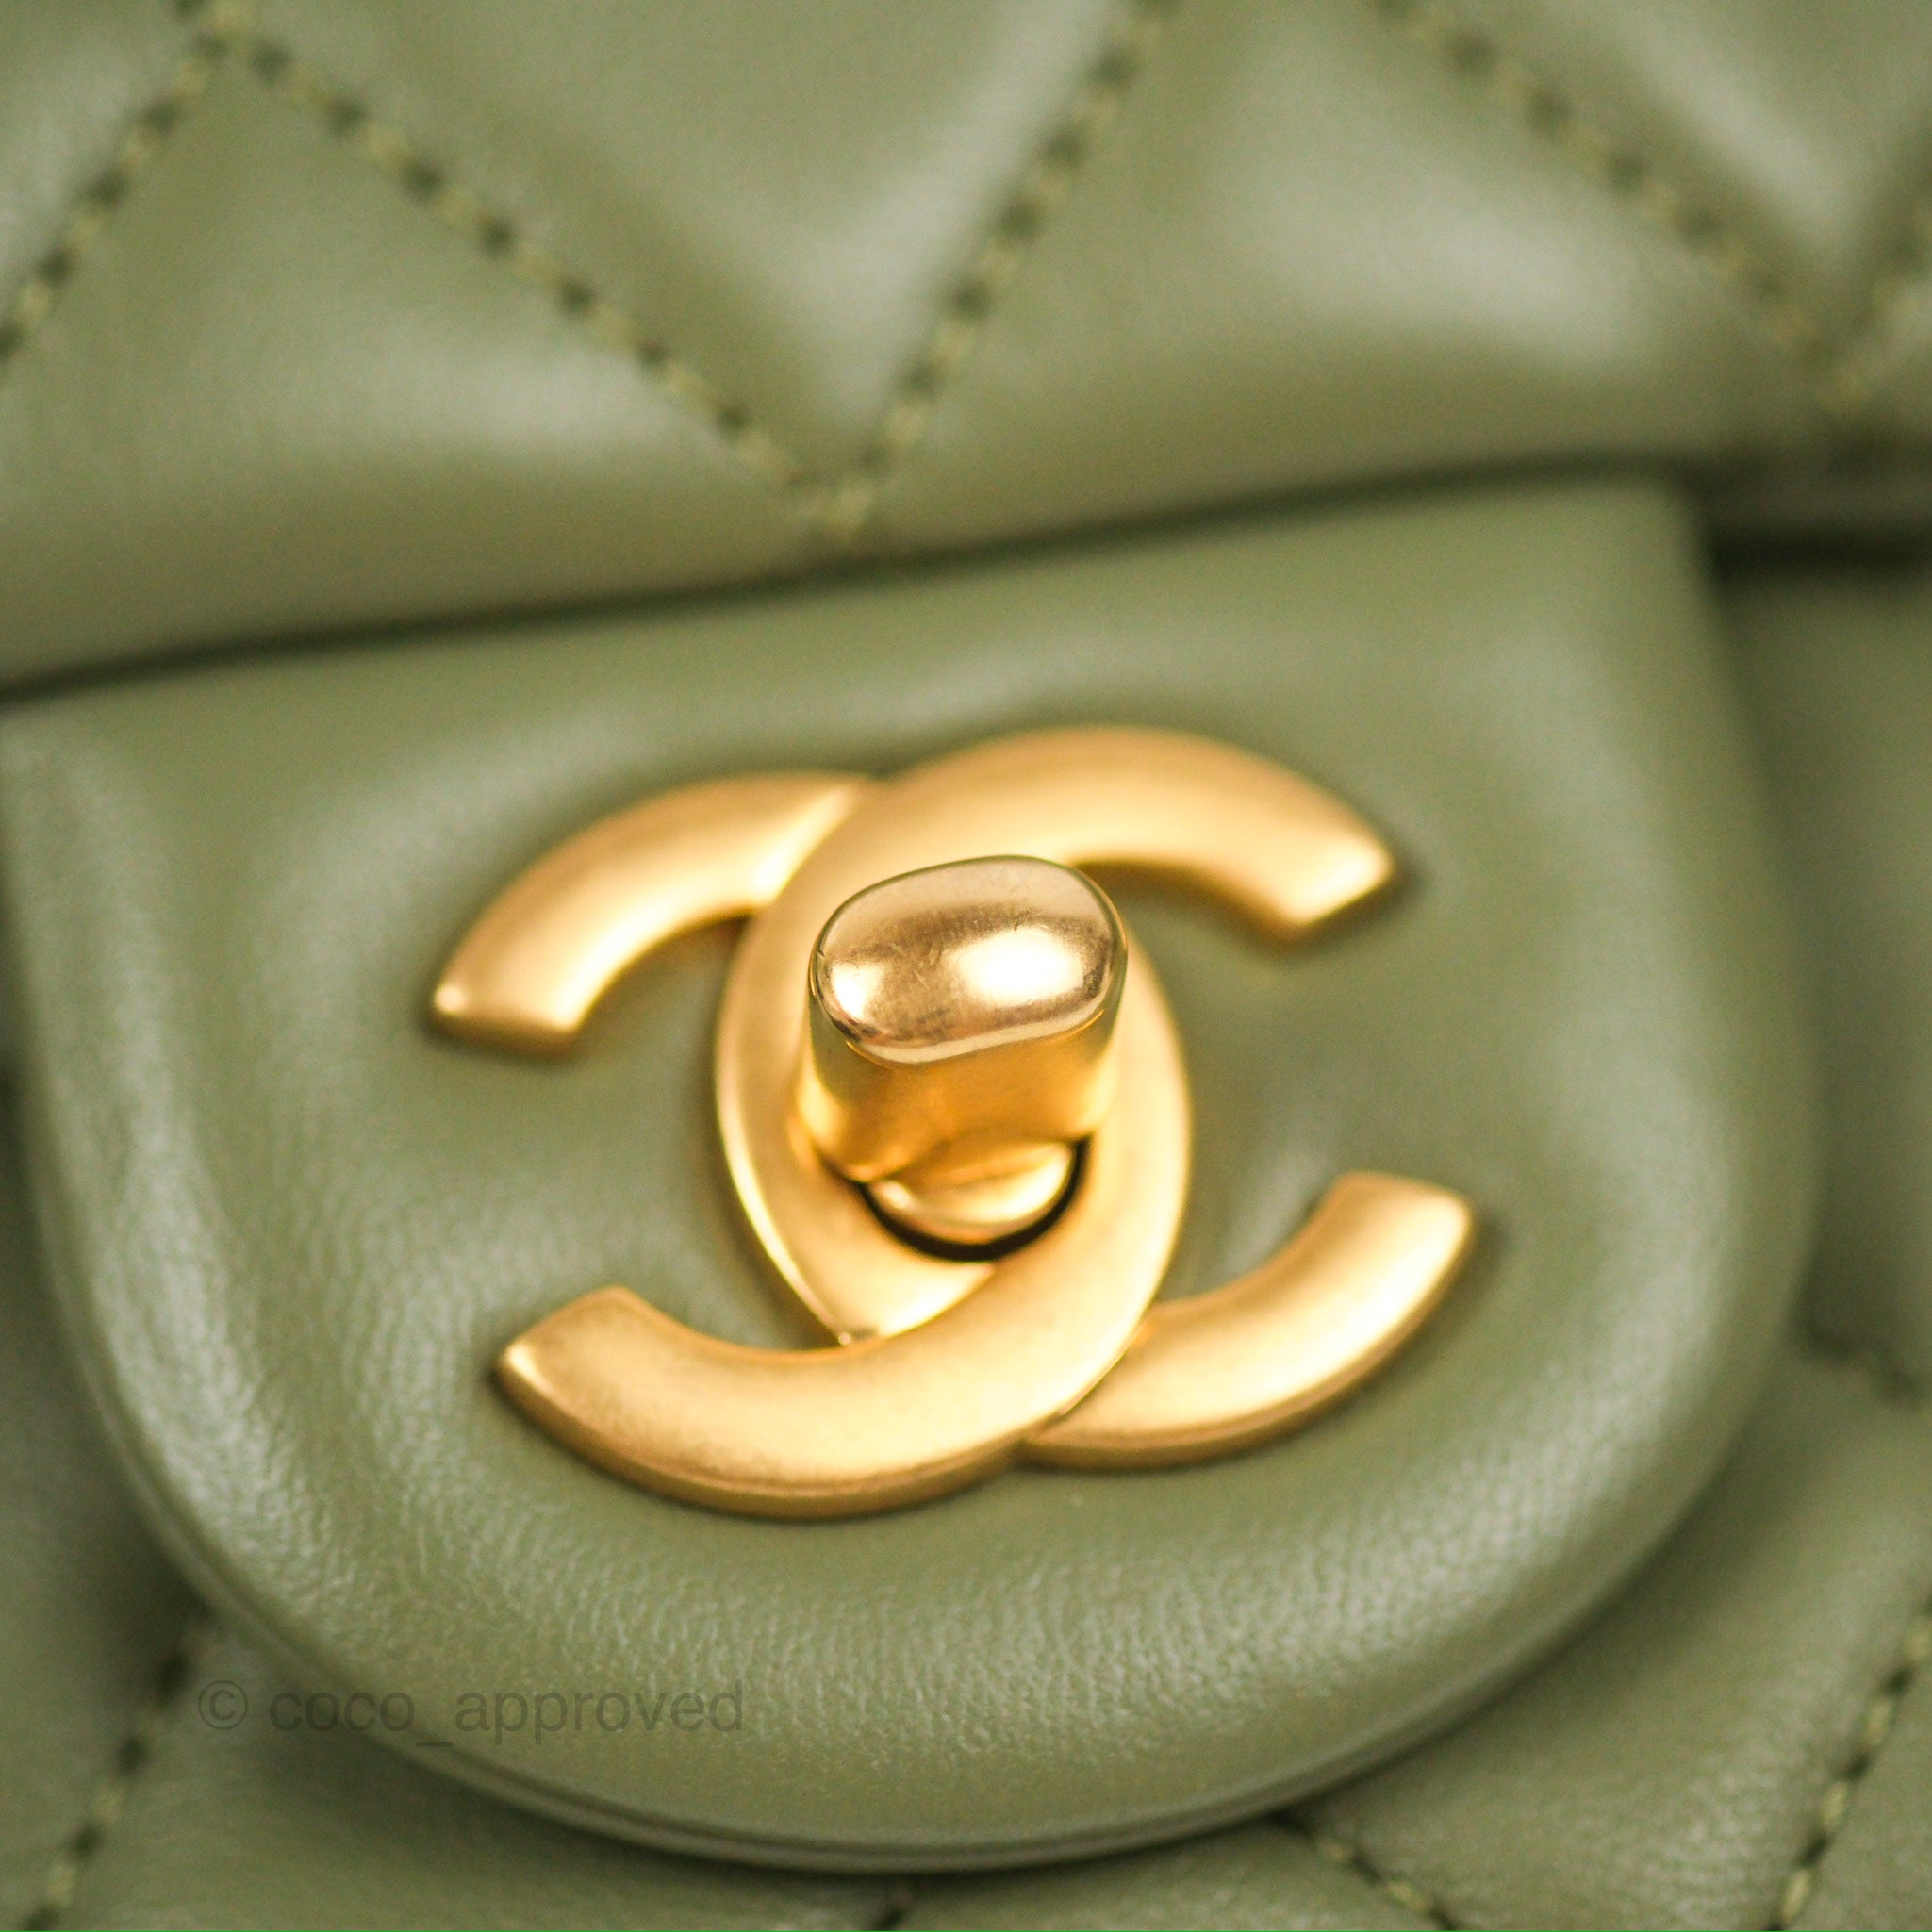 Chanel Pearl Crush Mini Square Quilted Olive Green Lambskin Aged